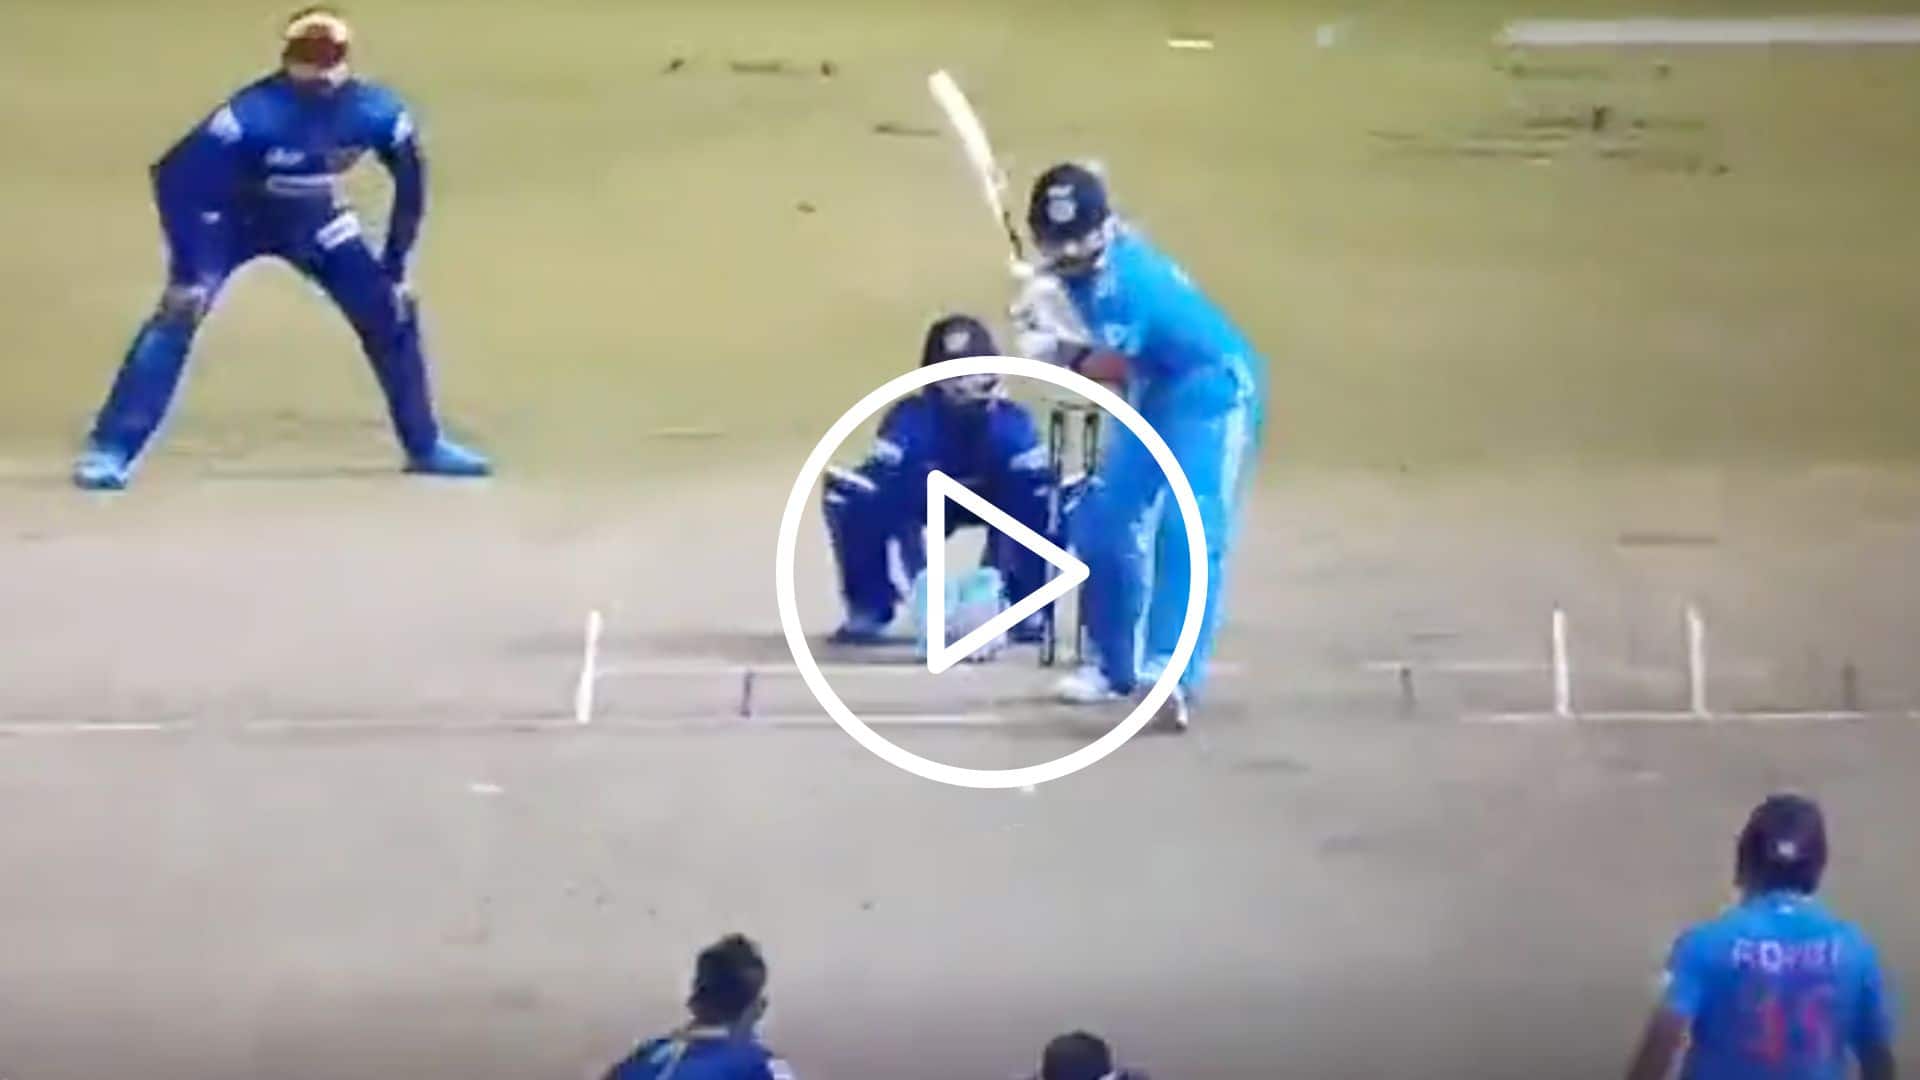 [Watch] Virat Kohli Left Stunned as Dunith Wellalge Sends Him Packing With a Beauty